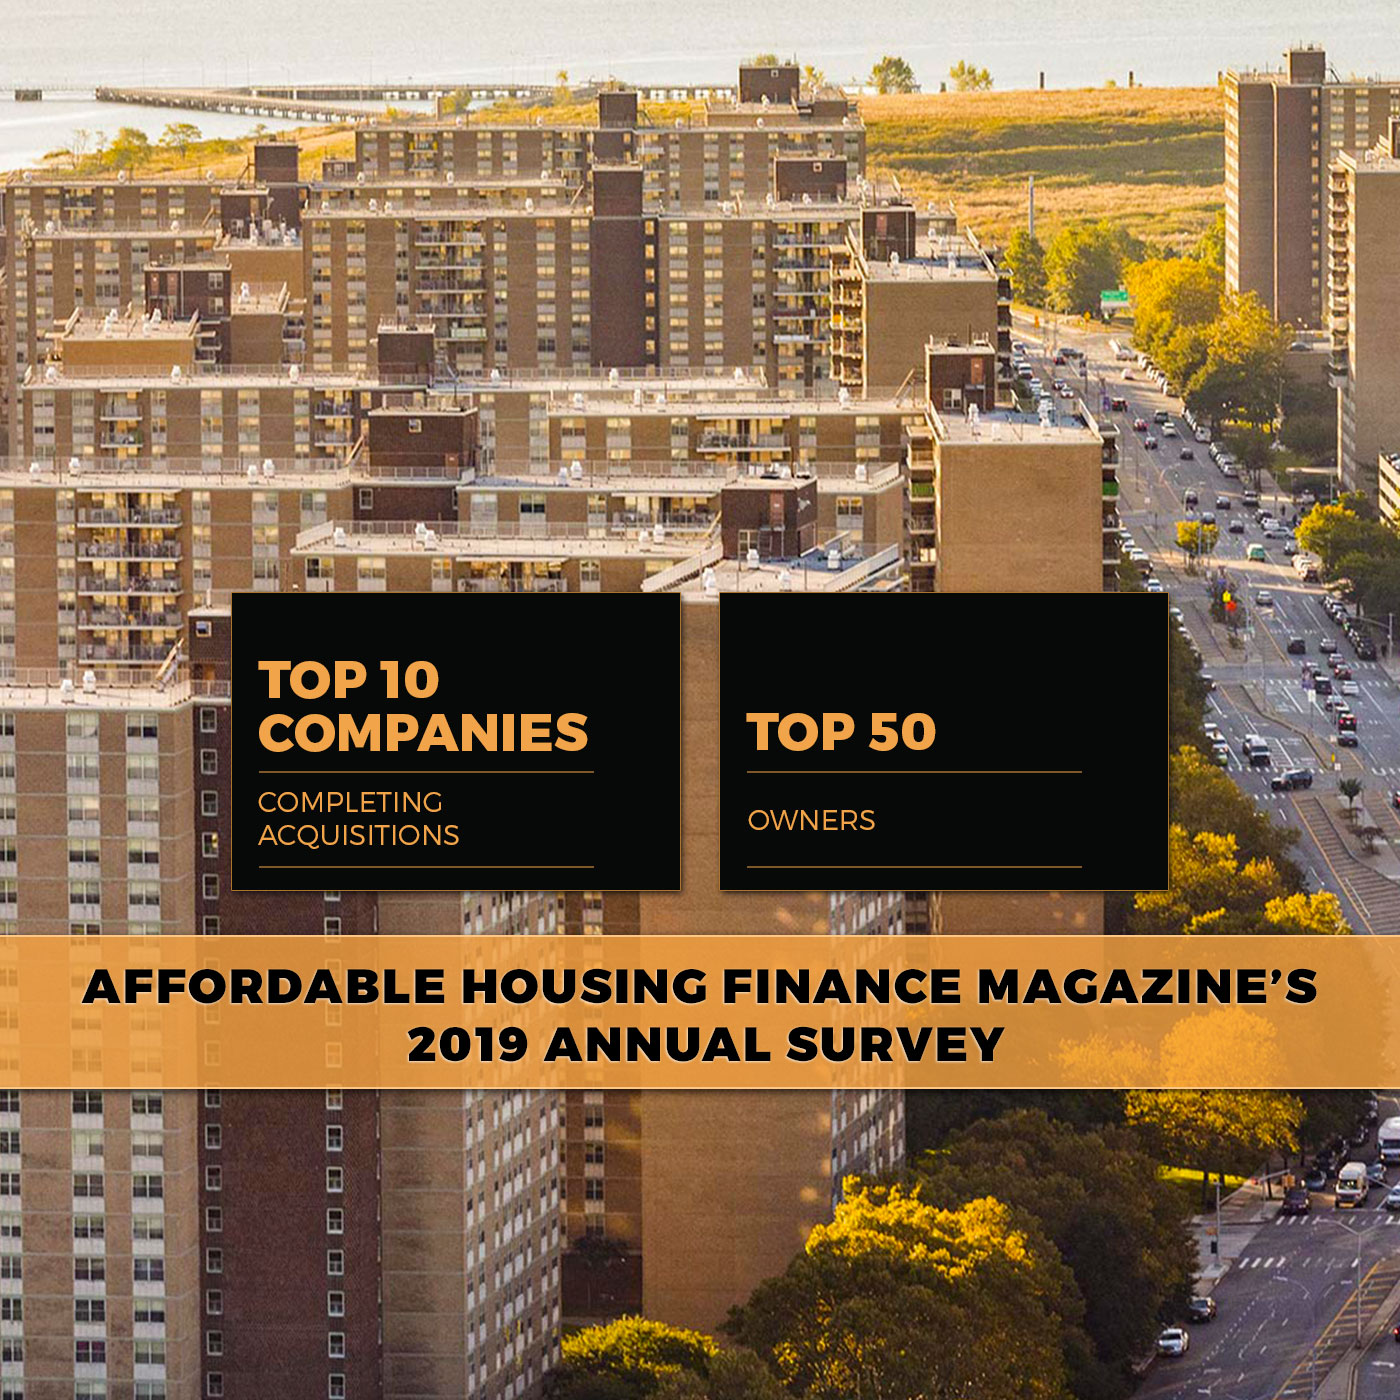 LIHC ranks high again on Affordable Housing Finance's 2019 awards